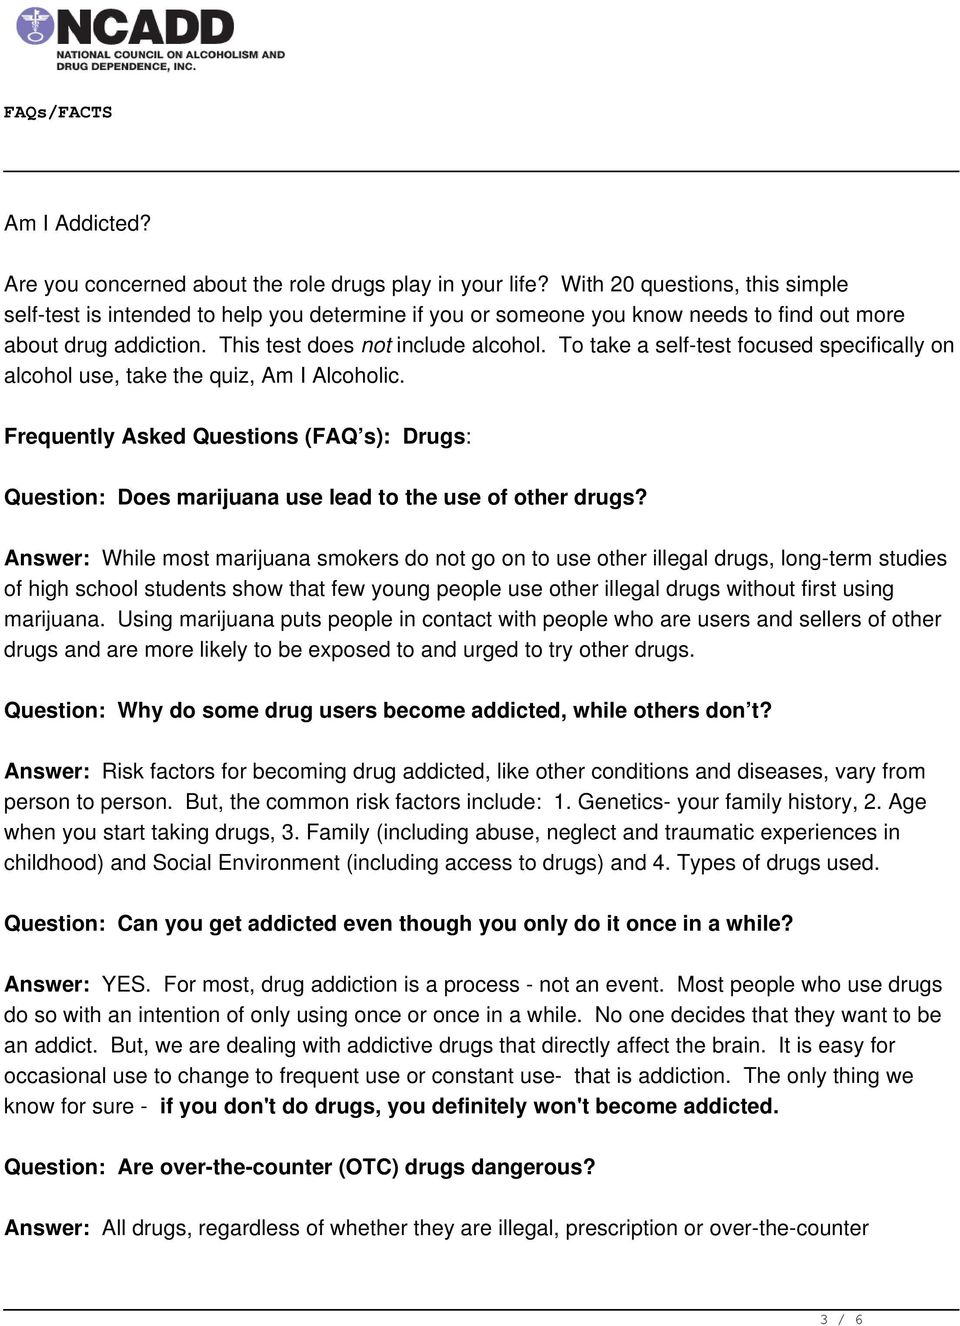 To take a self-test focused specifically on alcohol use, take the quiz, Am I Alcoholic. Frequently Asked Questions (FAQ s): Drugs: Question: Does marijuana use lead to the use of other drugs?